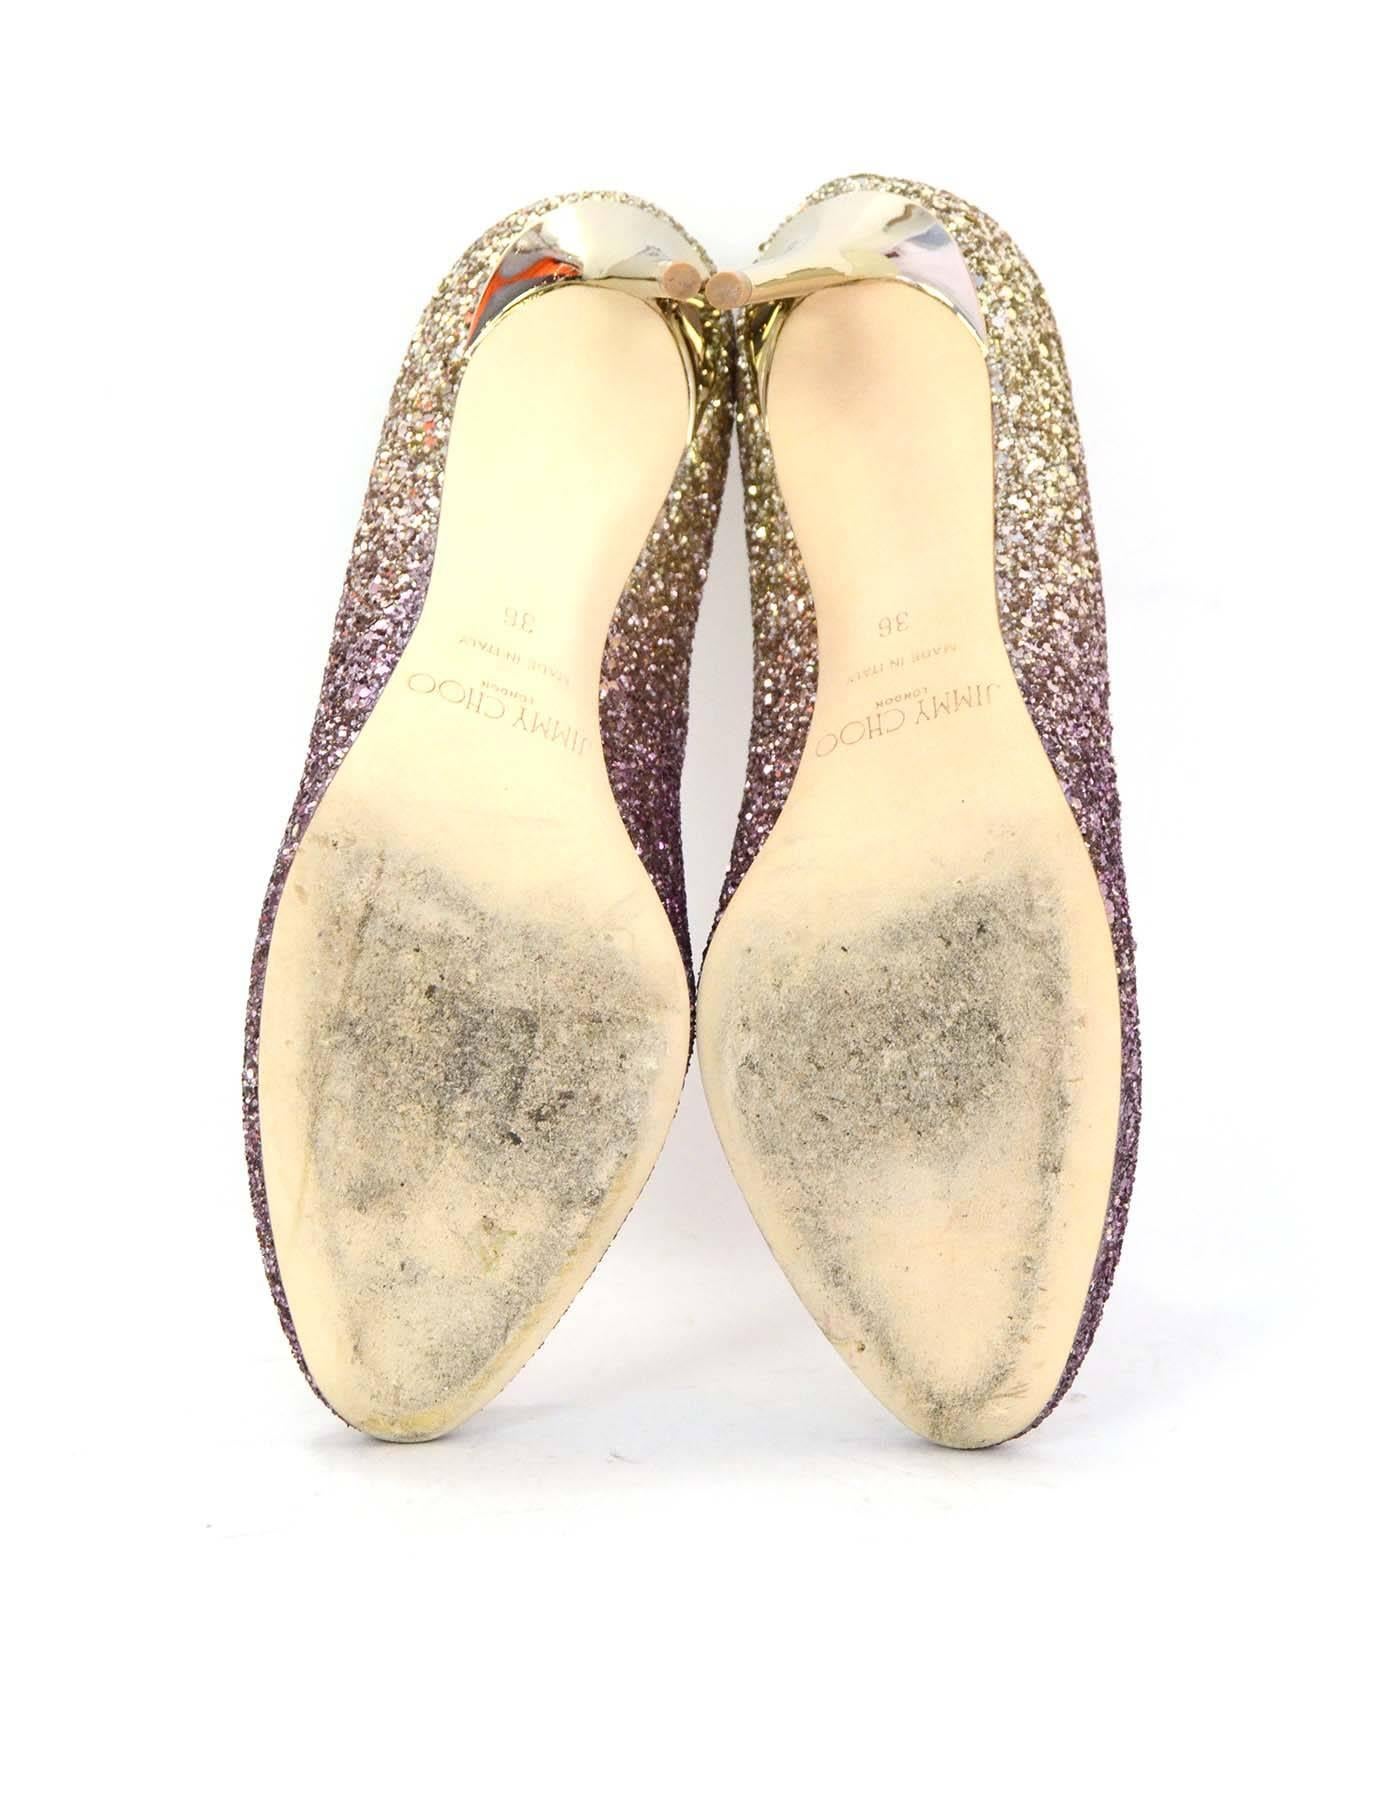 Jimmy Choo Esme Gold and Pink Ombre Glitter Pumps Sz 36 1